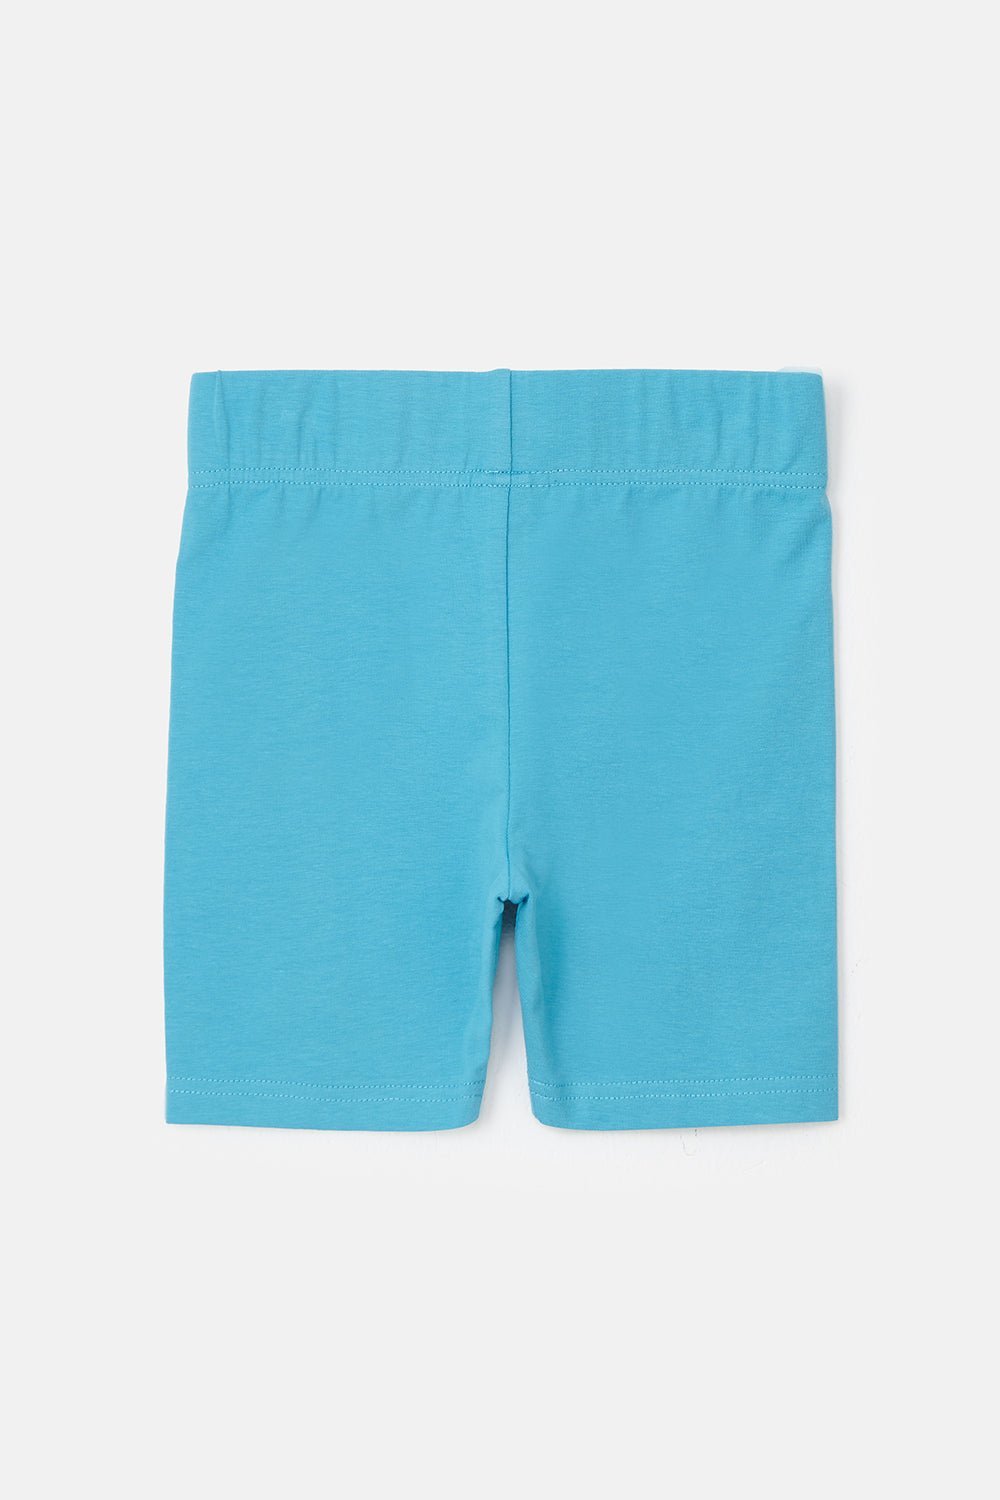 Polly Shorts - Turquoise-Lighthouse